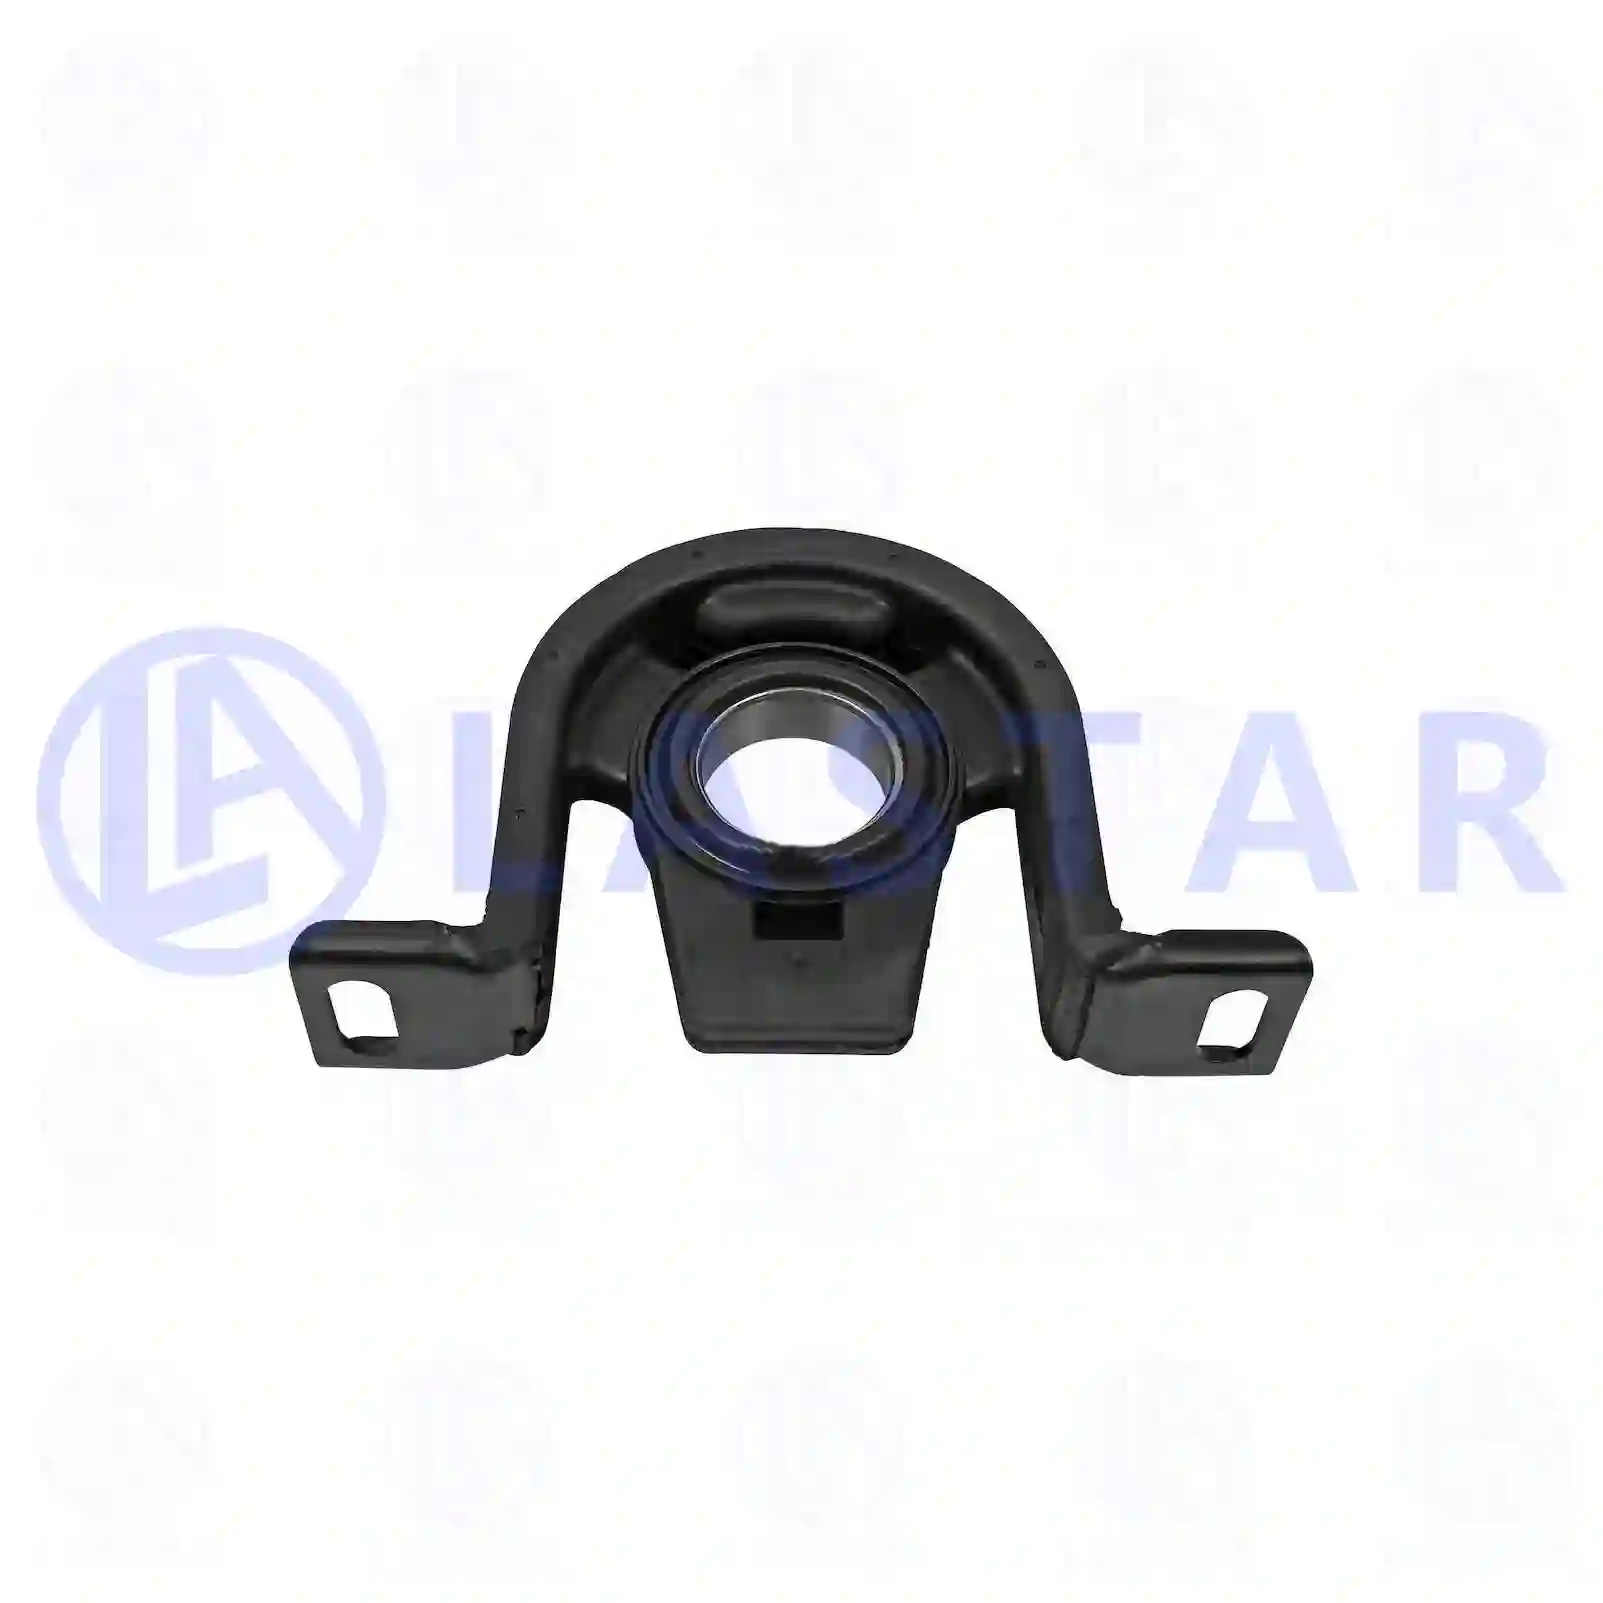 Support Bearing Center bearing, la no: 77734270 ,  oem no:9014110312, 9014110412, 2D0521351 Lastar Spare Part | Truck Spare Parts, Auotomotive Spare Parts